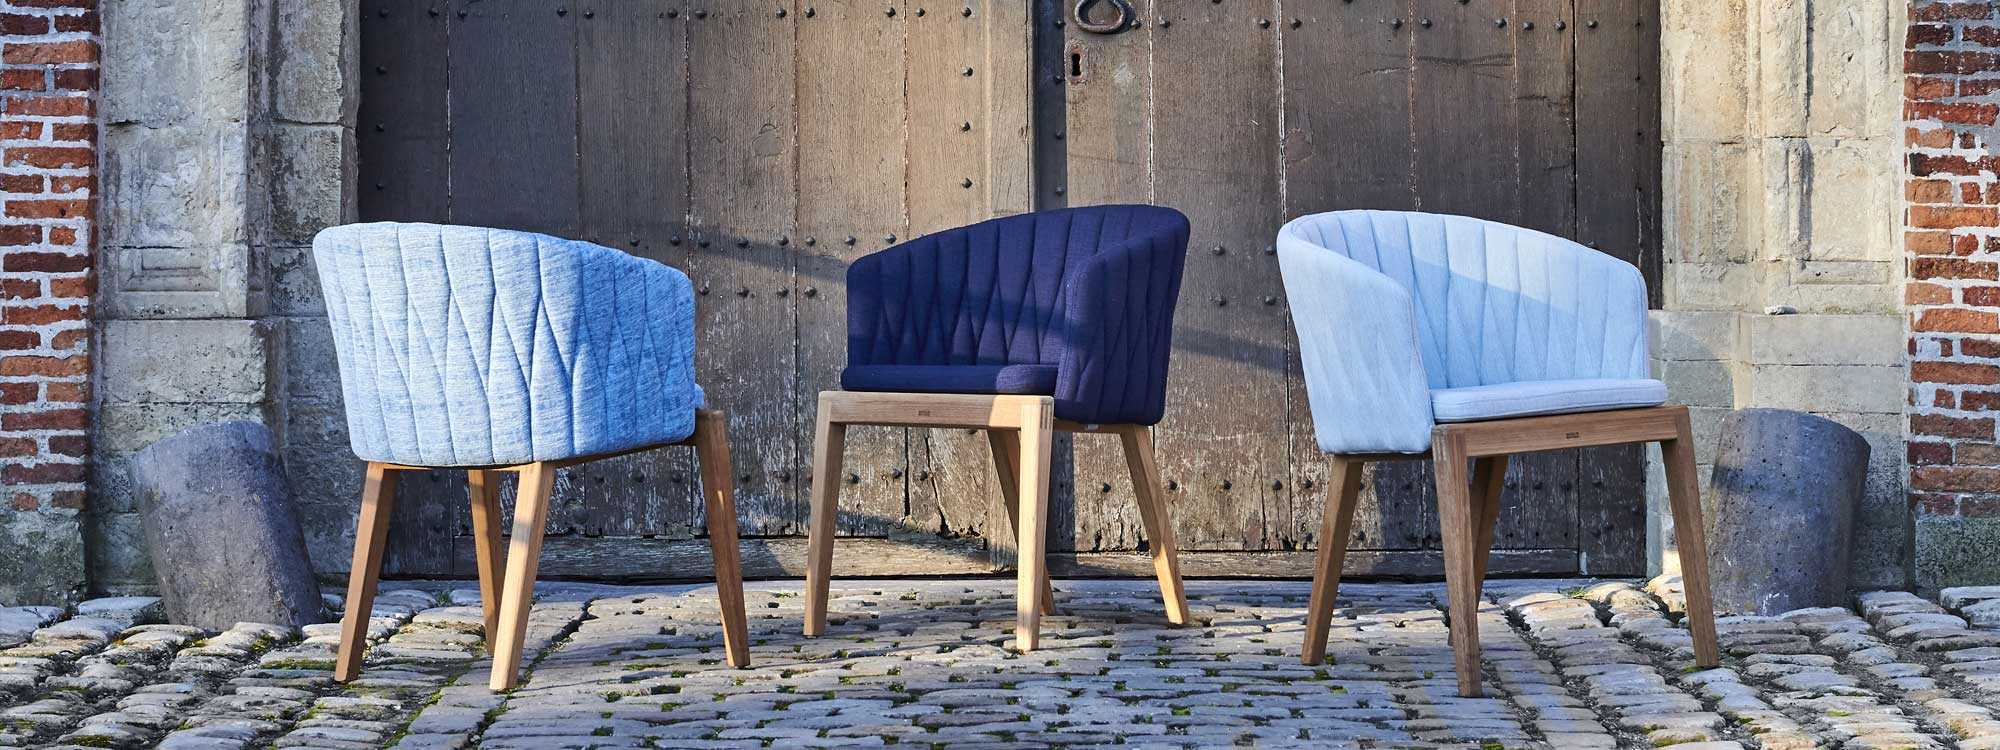 Image of Royal Botania Calypso chairs with blue upholstery, shown in cobbled courtyard